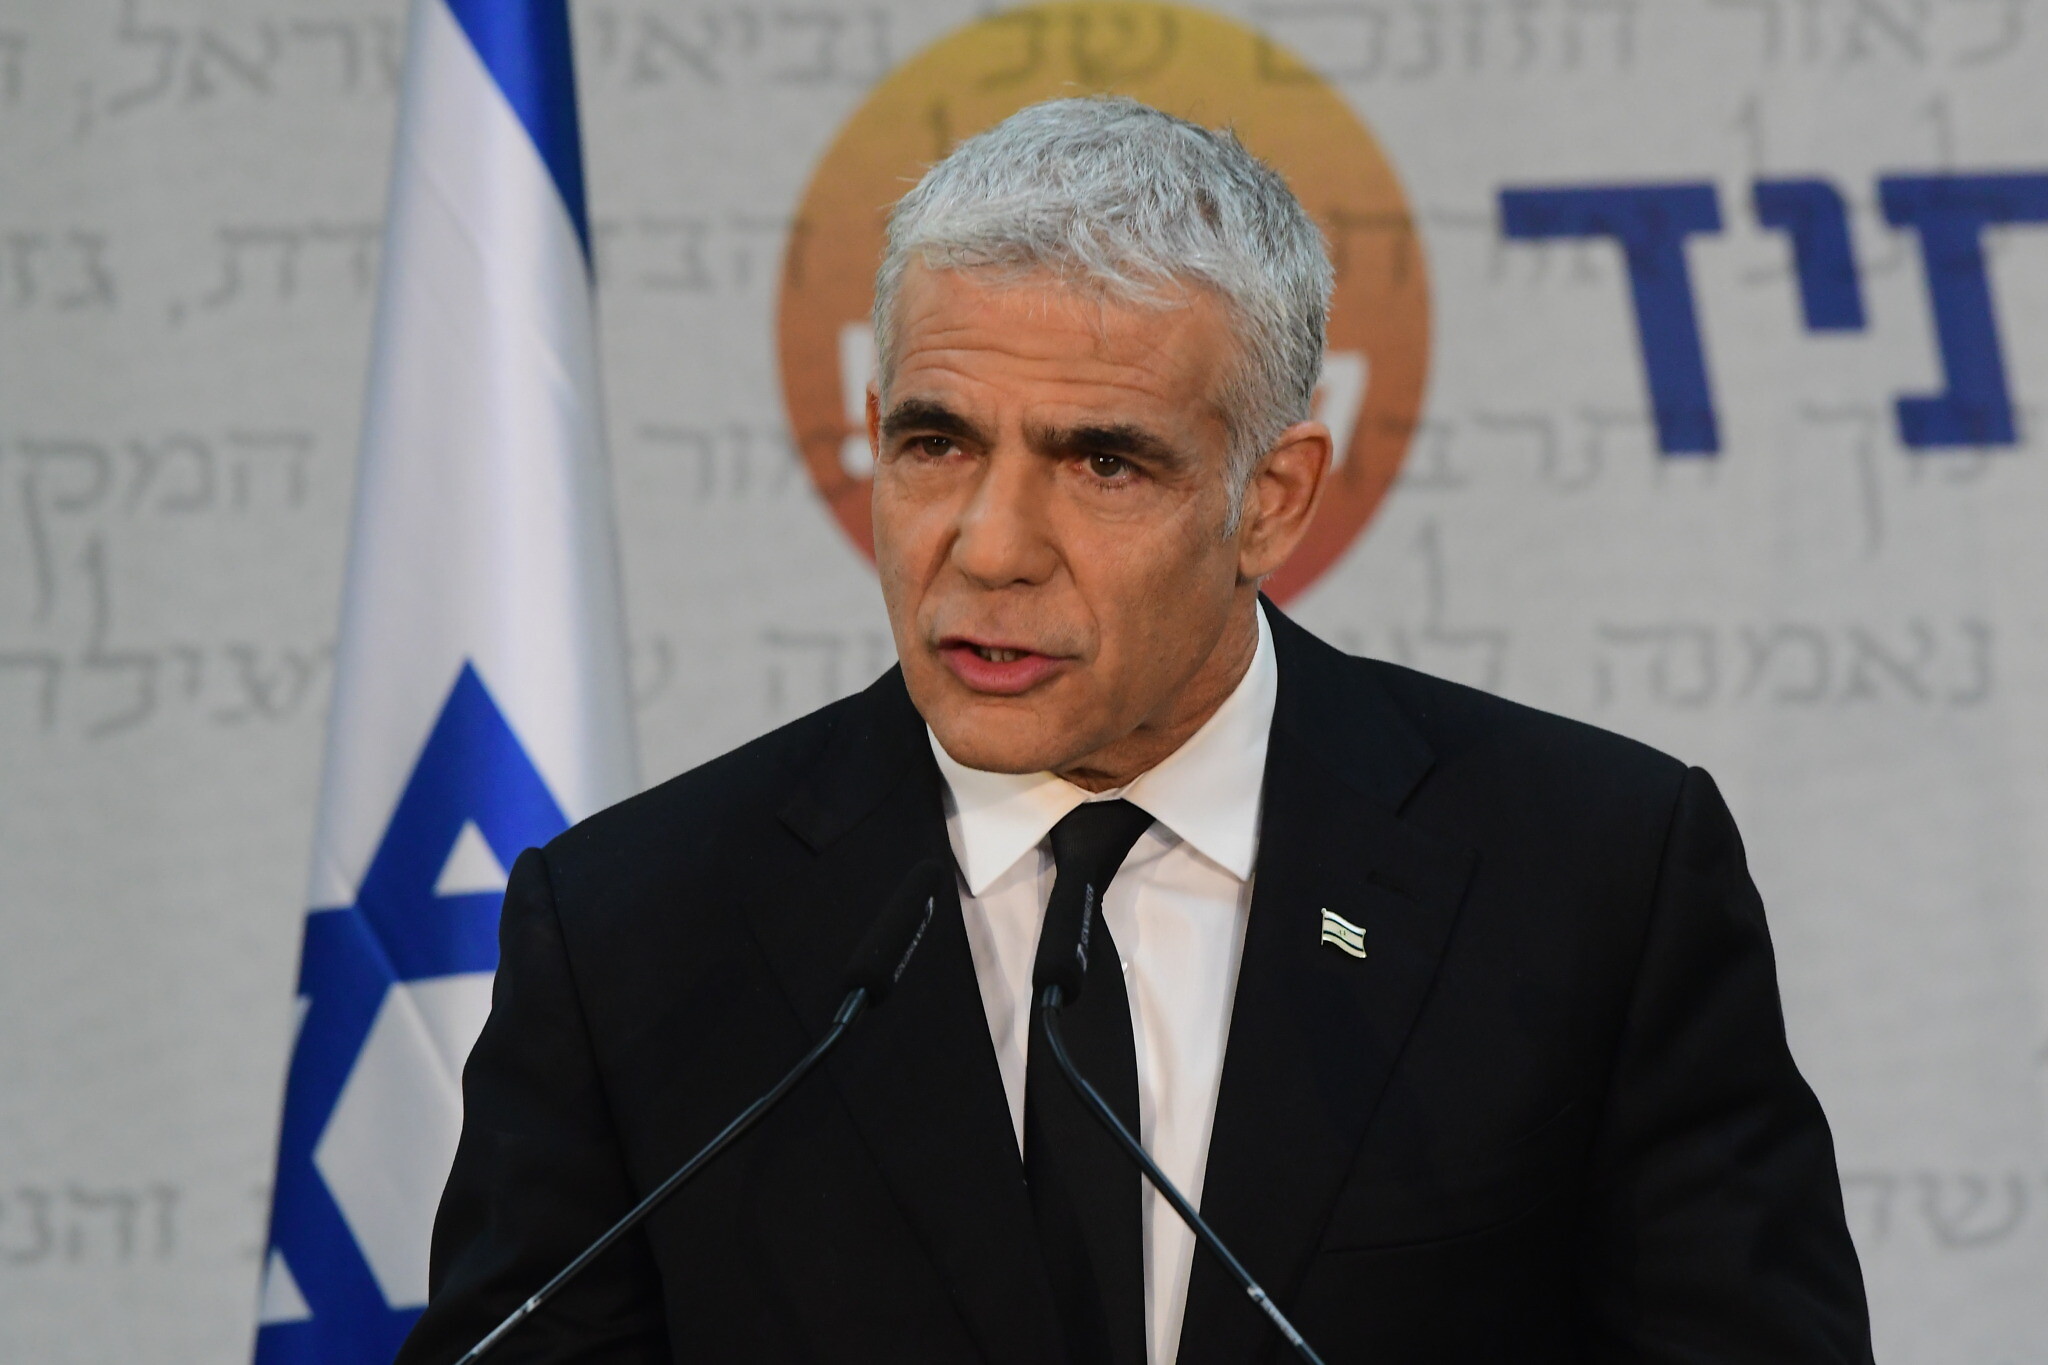 Yair Lapid/Source: The Times of Israel/illustration